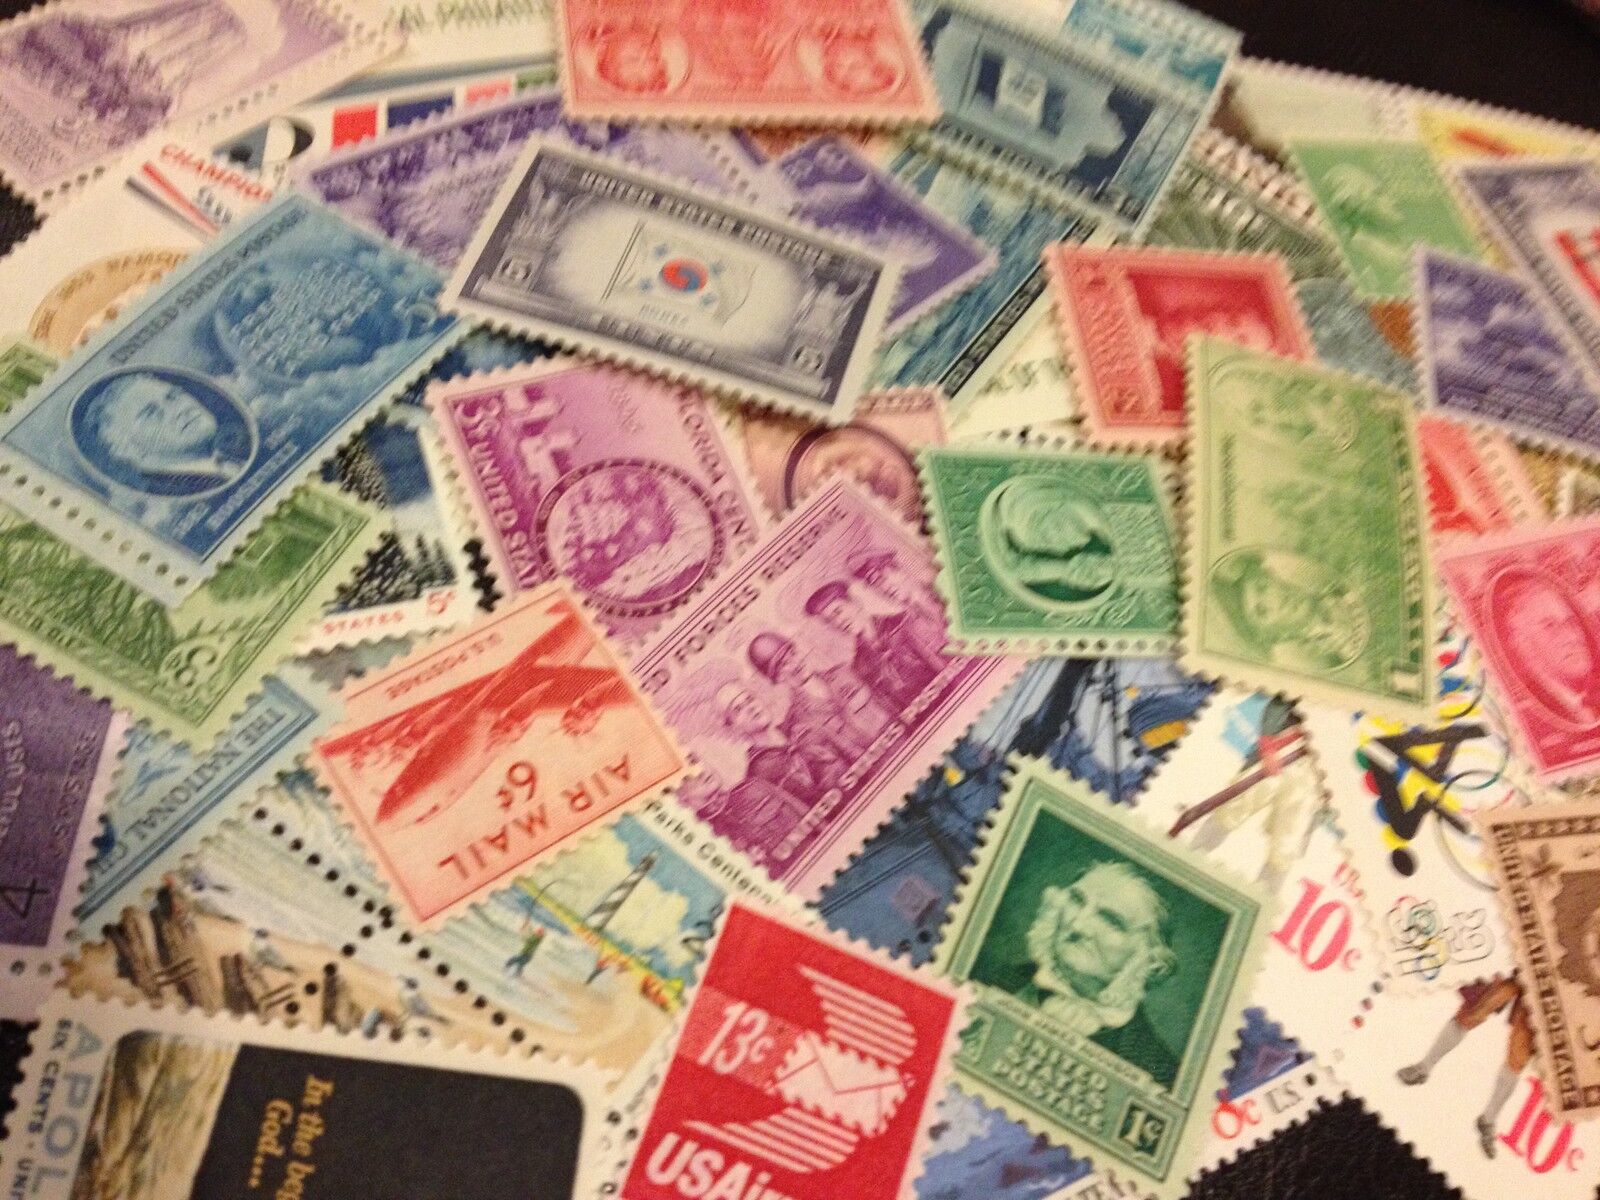 60 Unused US Stamps from 1930's to 60's including World War 2 era stamps